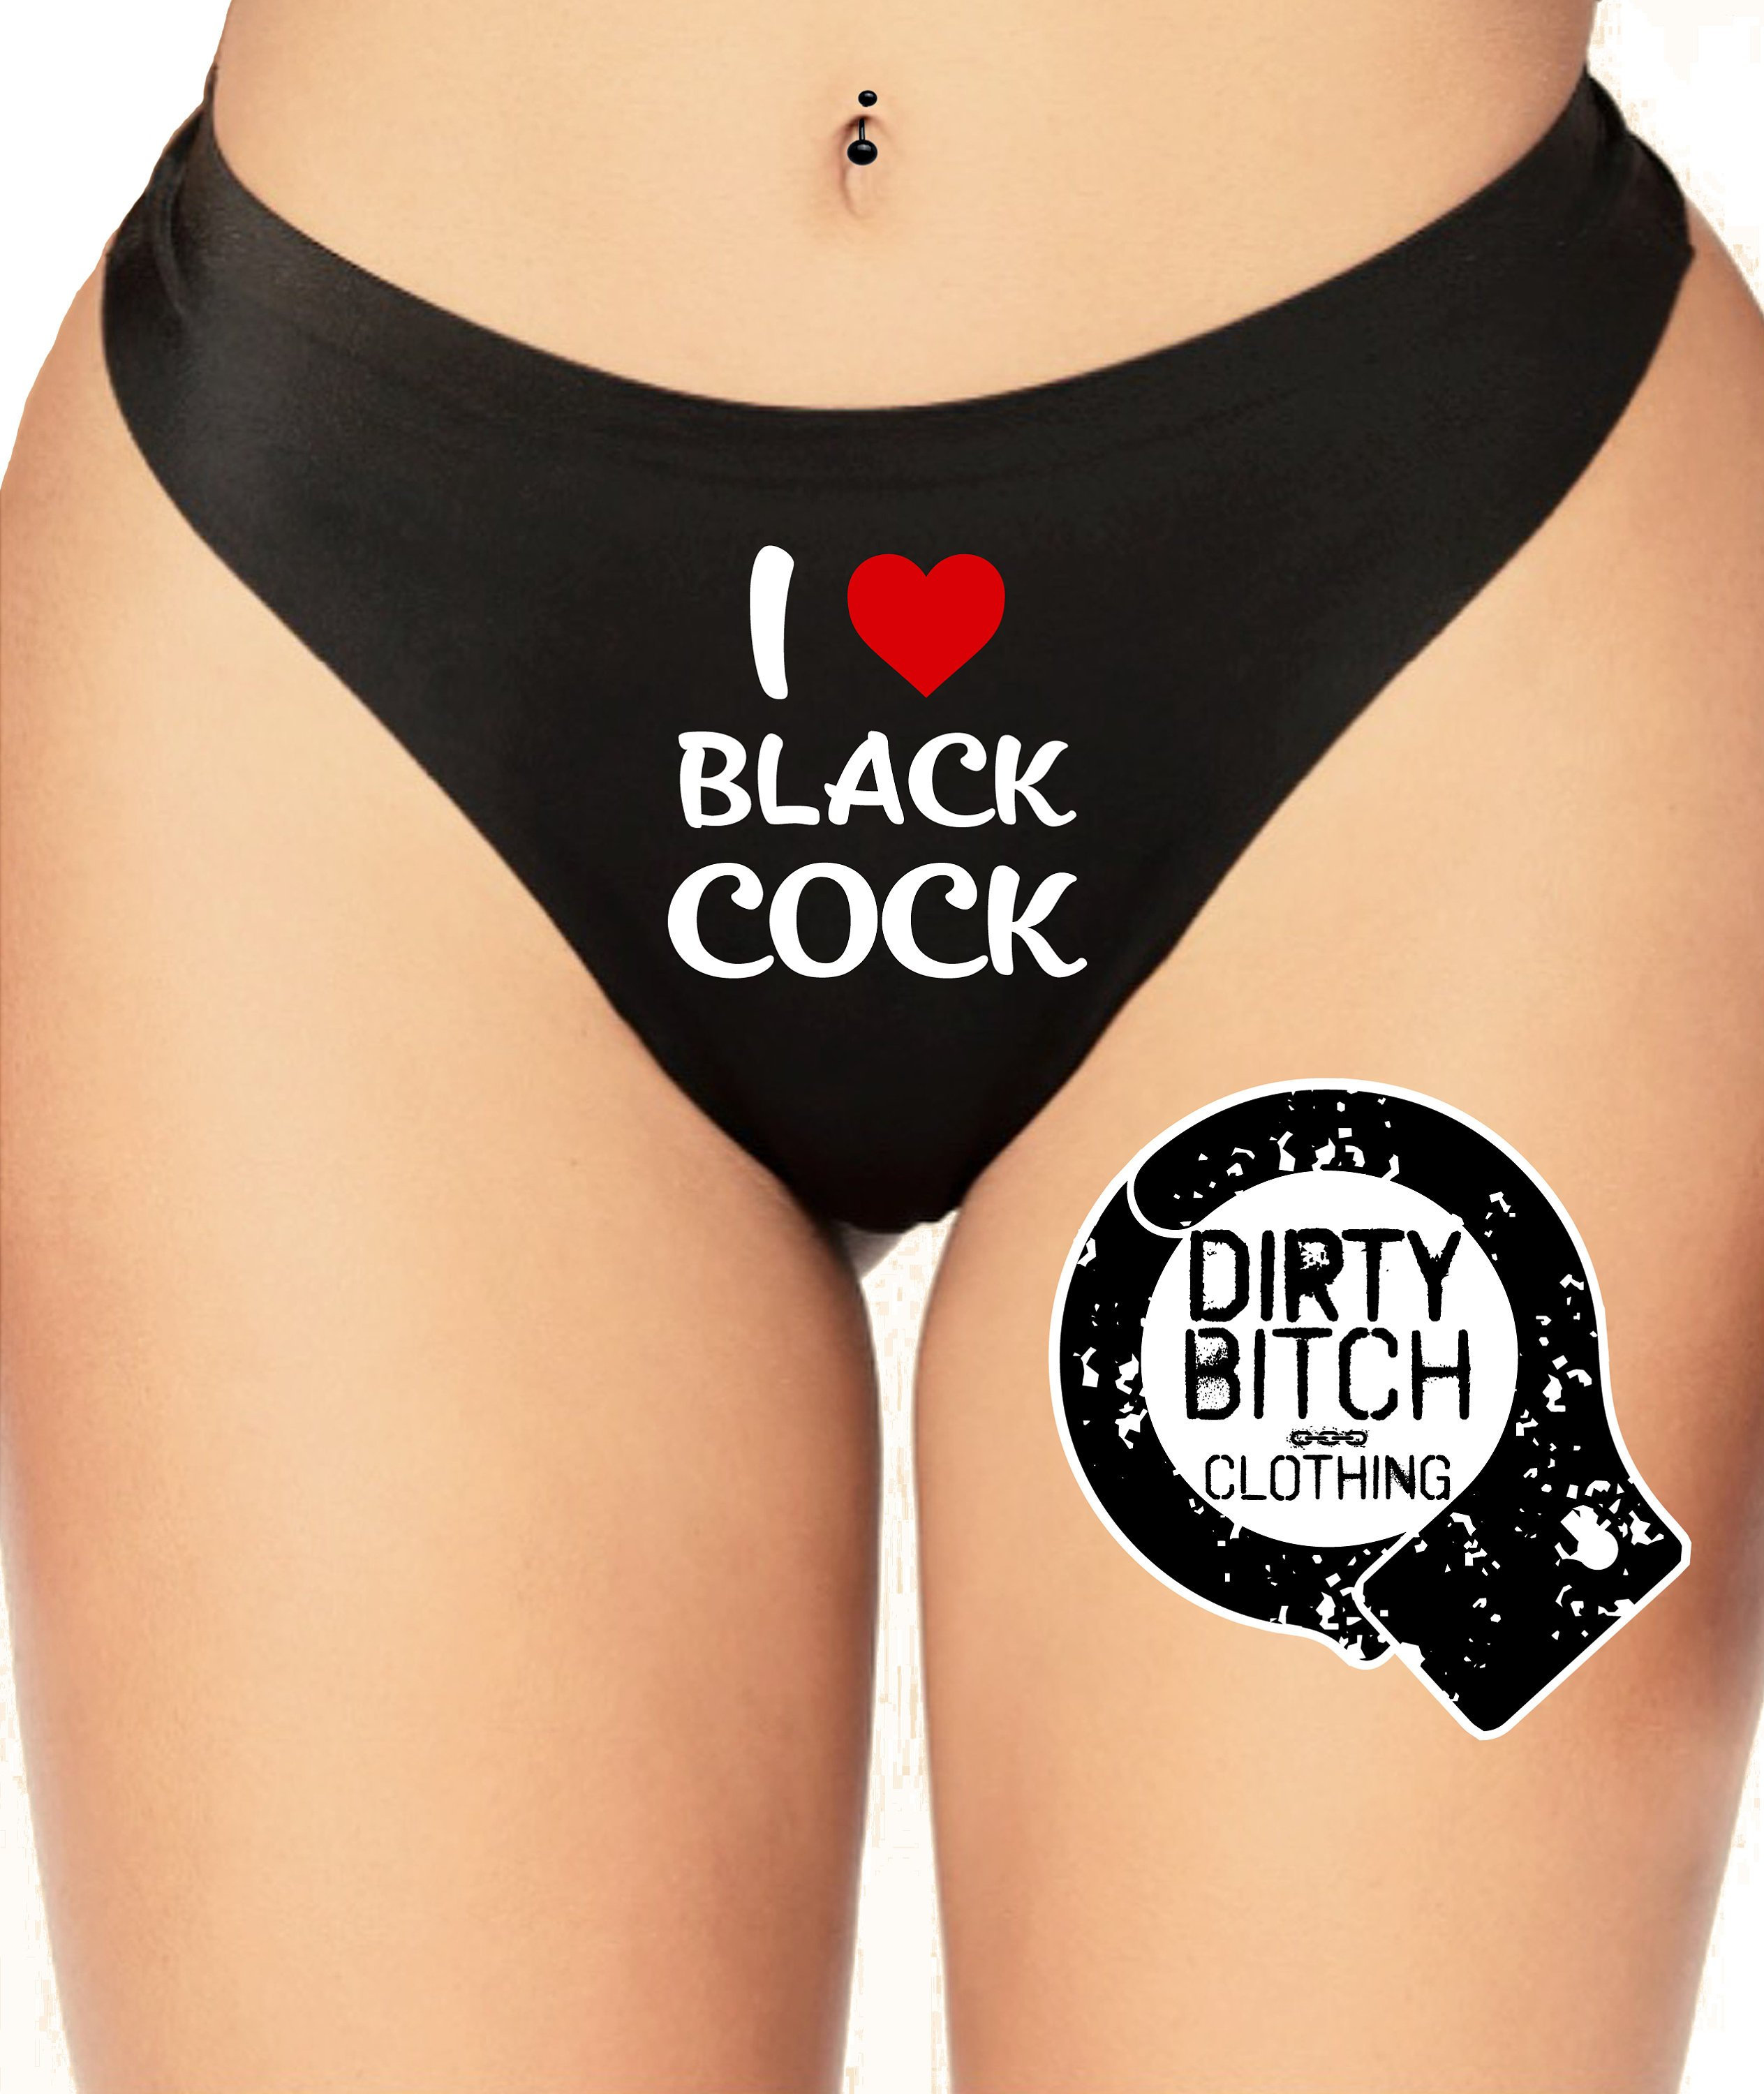 dave here recommends we love black cock pic